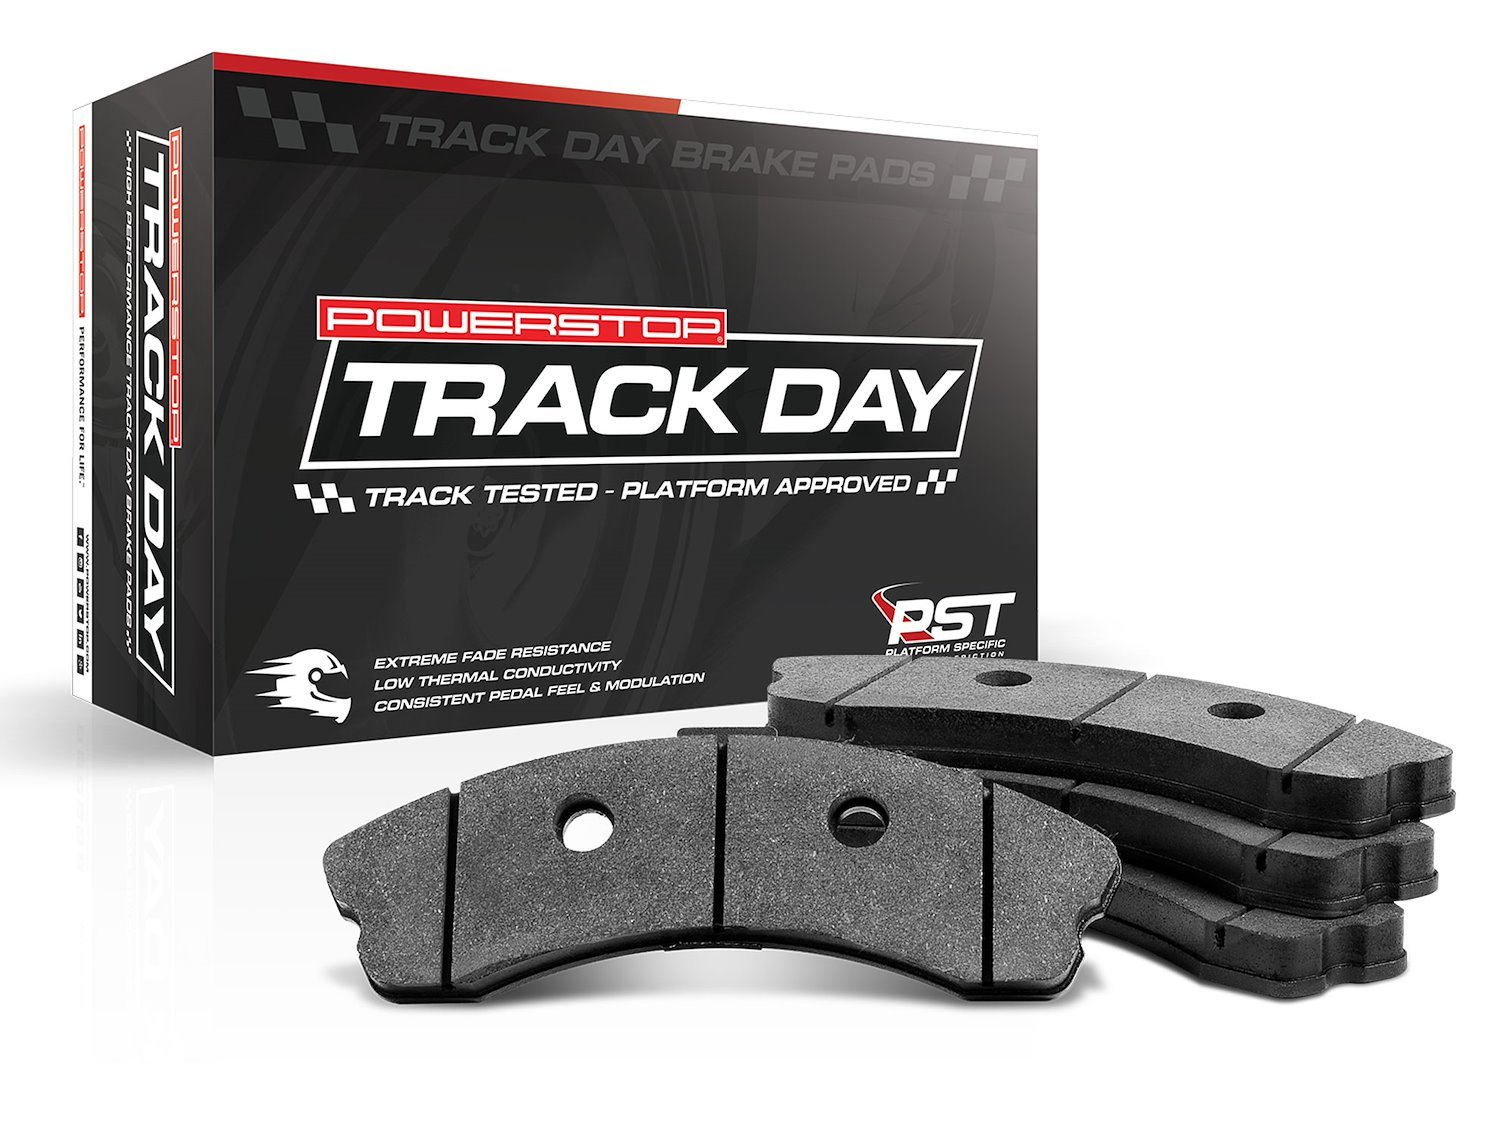 POWER STOP TRACK DAY PAD